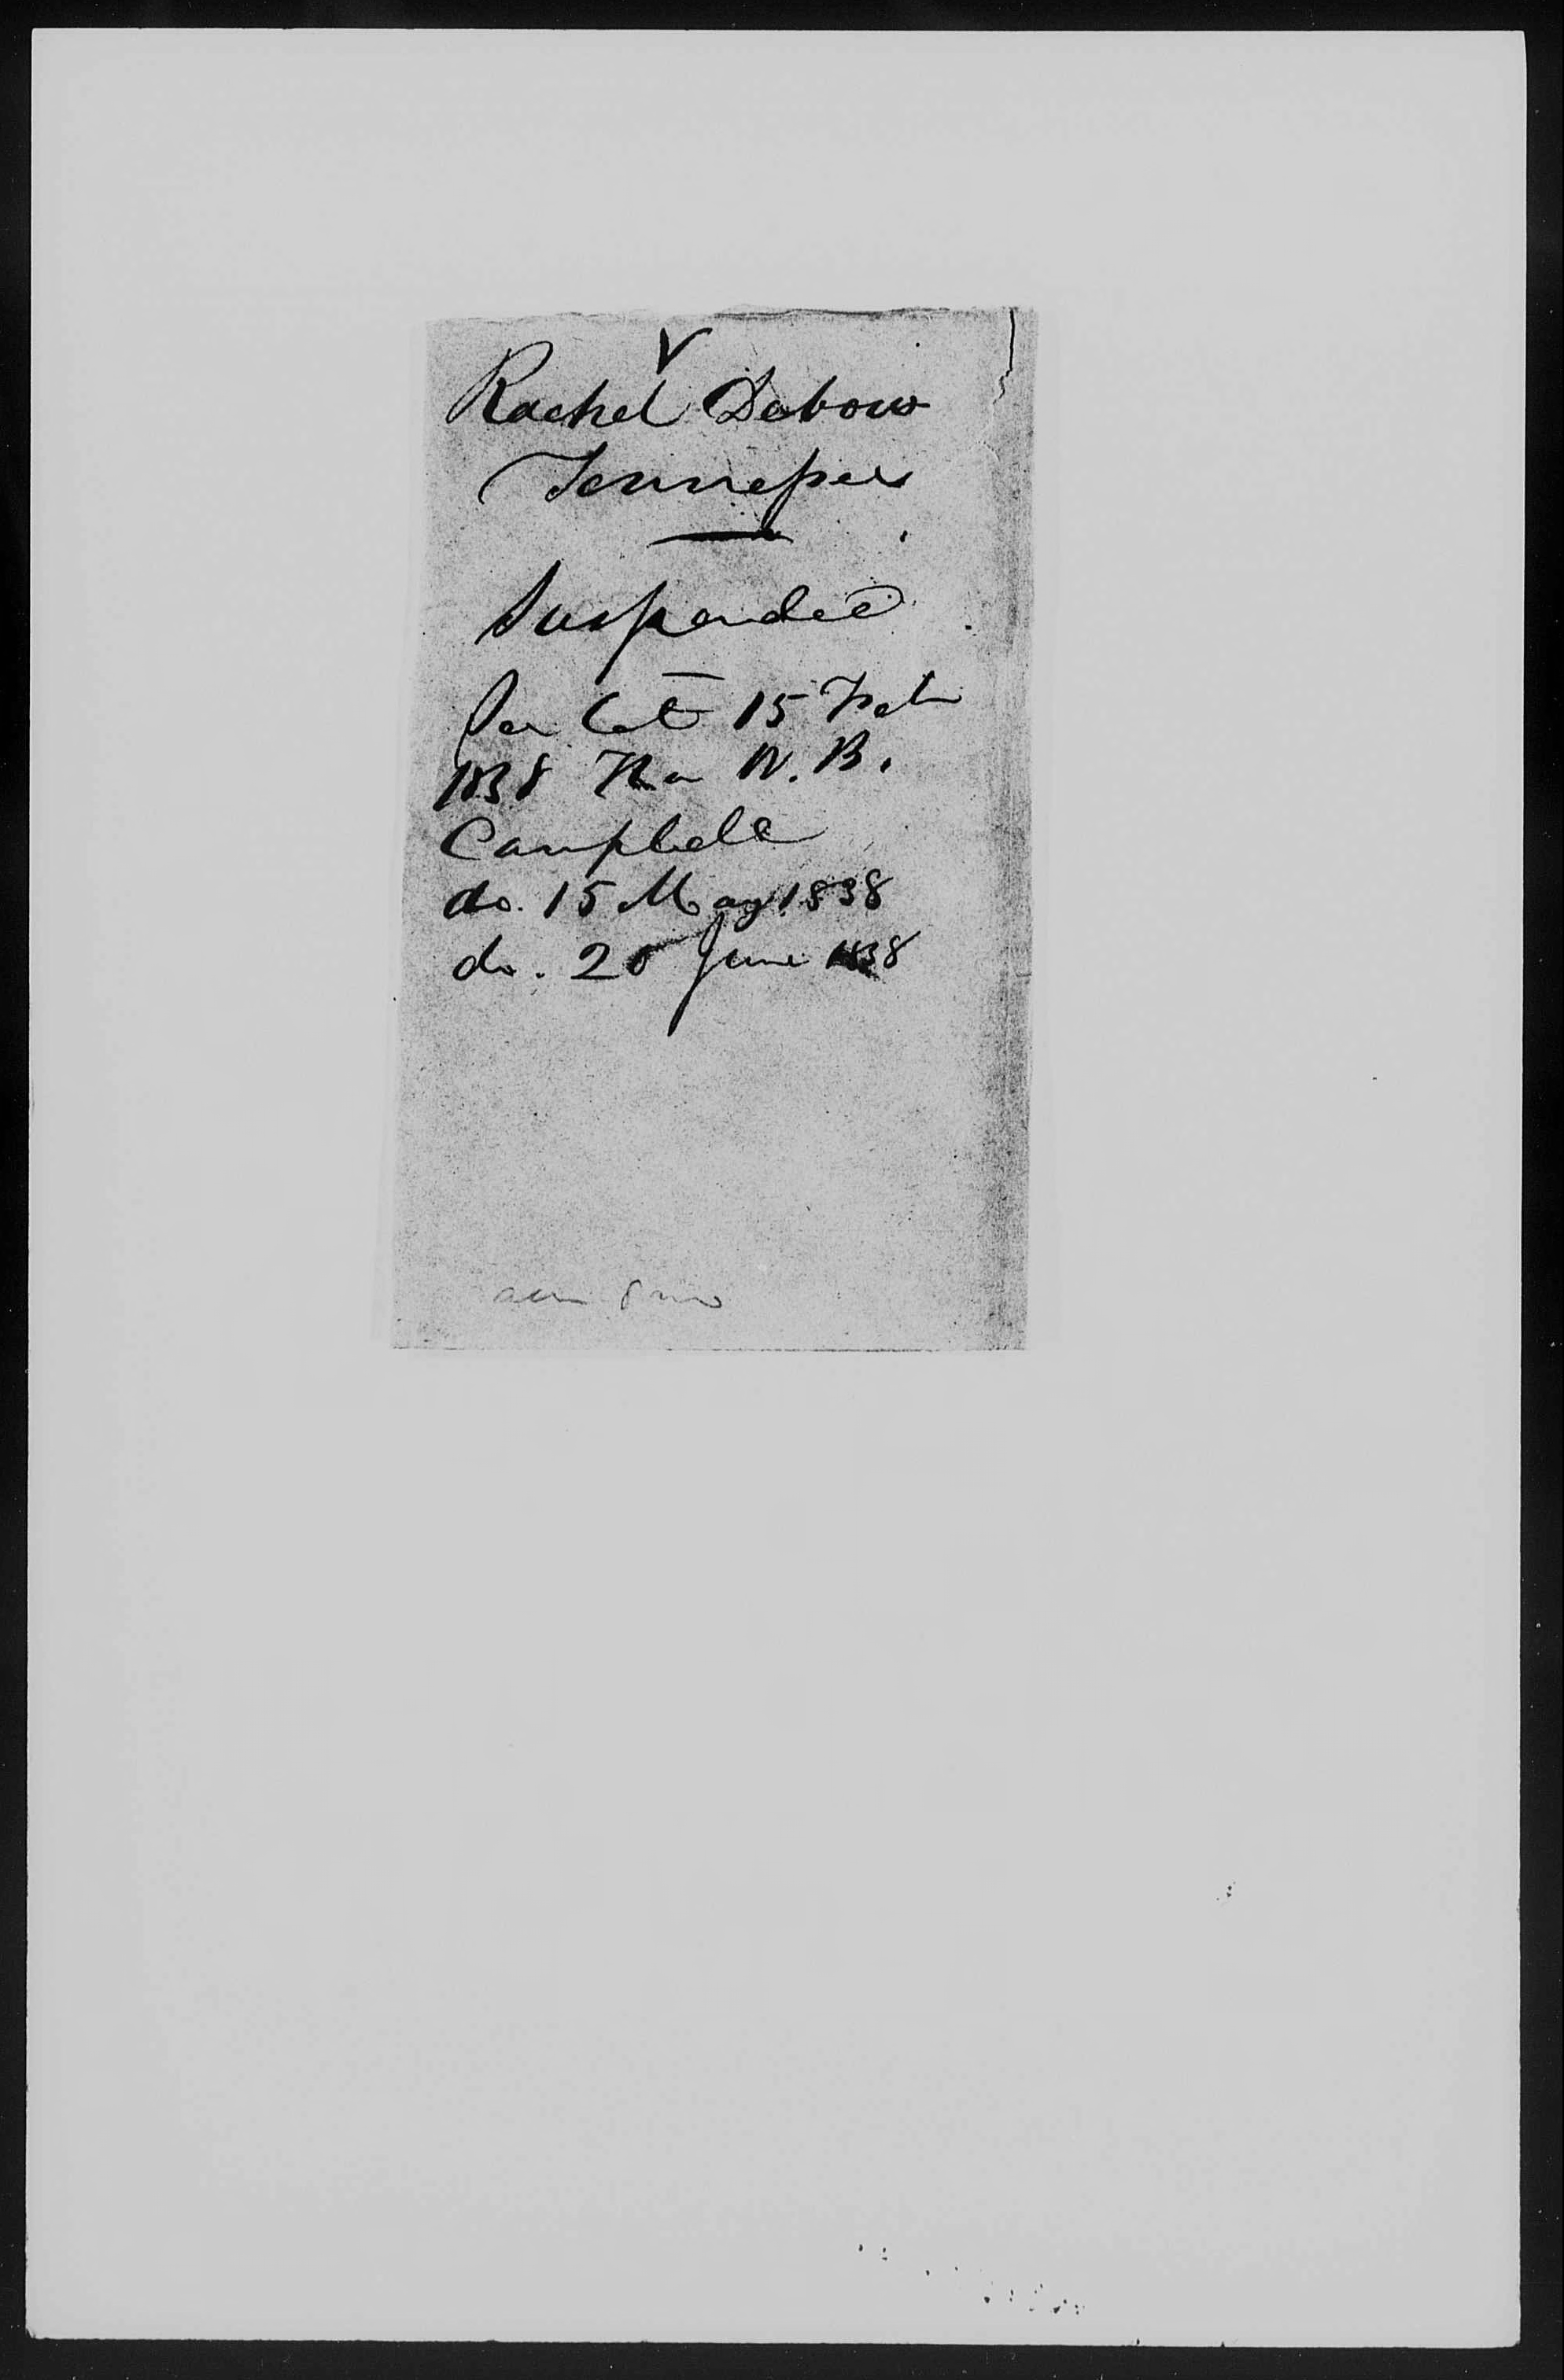 Order from William B. Campbell on the Pension Claim of Rachel Debow, 15 February 1838, page 3